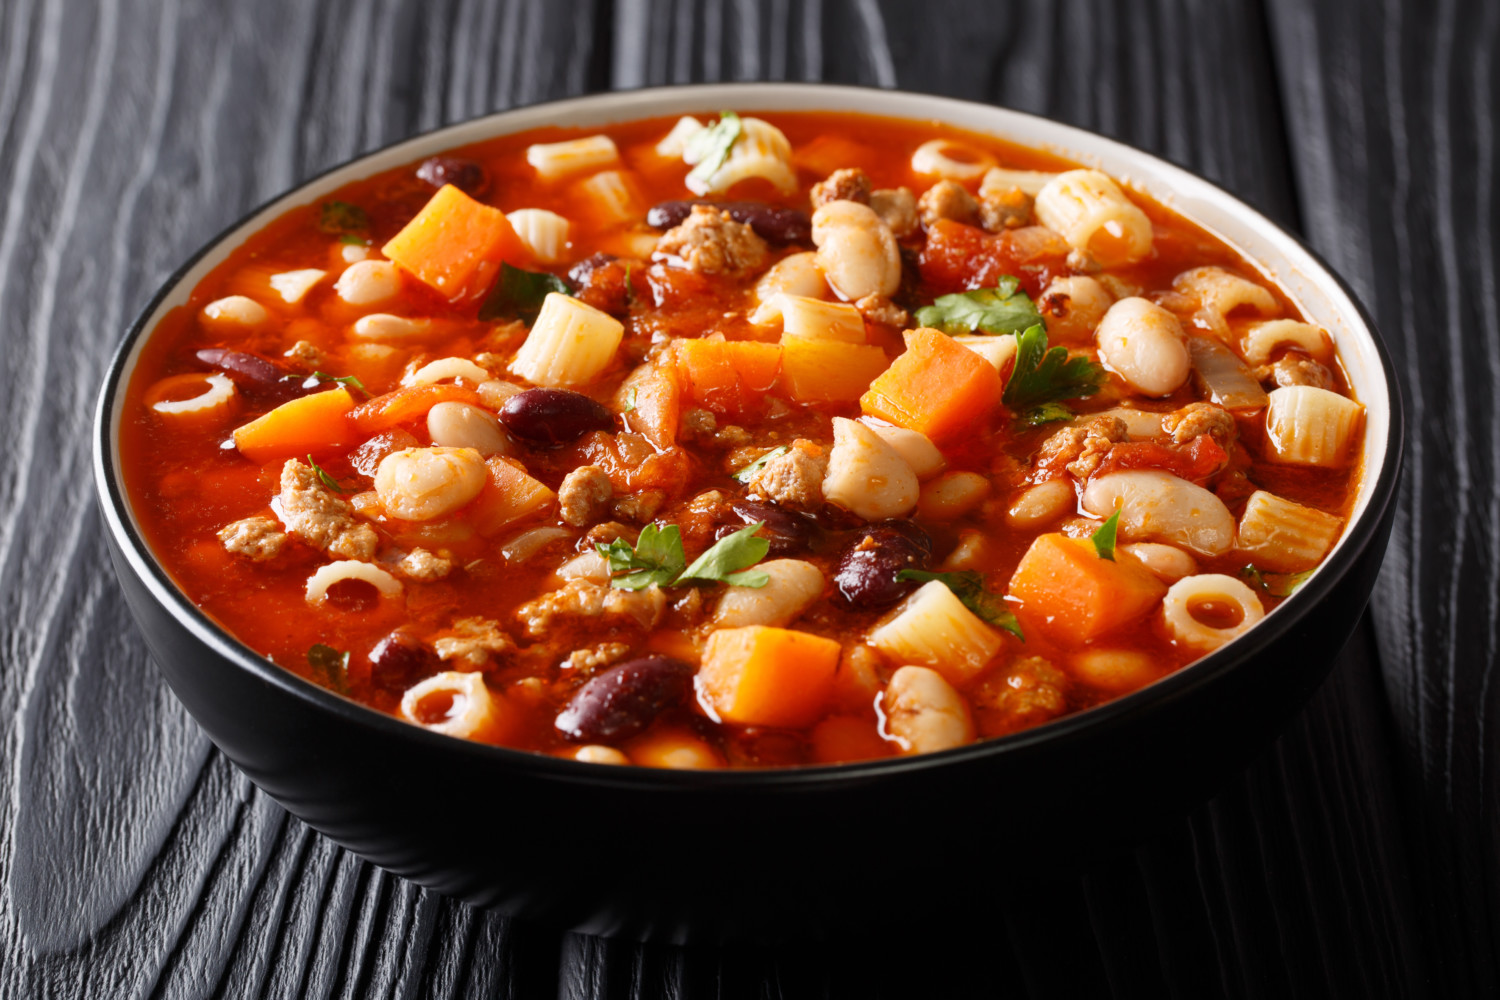 This Copycat Olive Garden Pasta Fagioli Soup Recipe For Slow Cooker Is Perf...